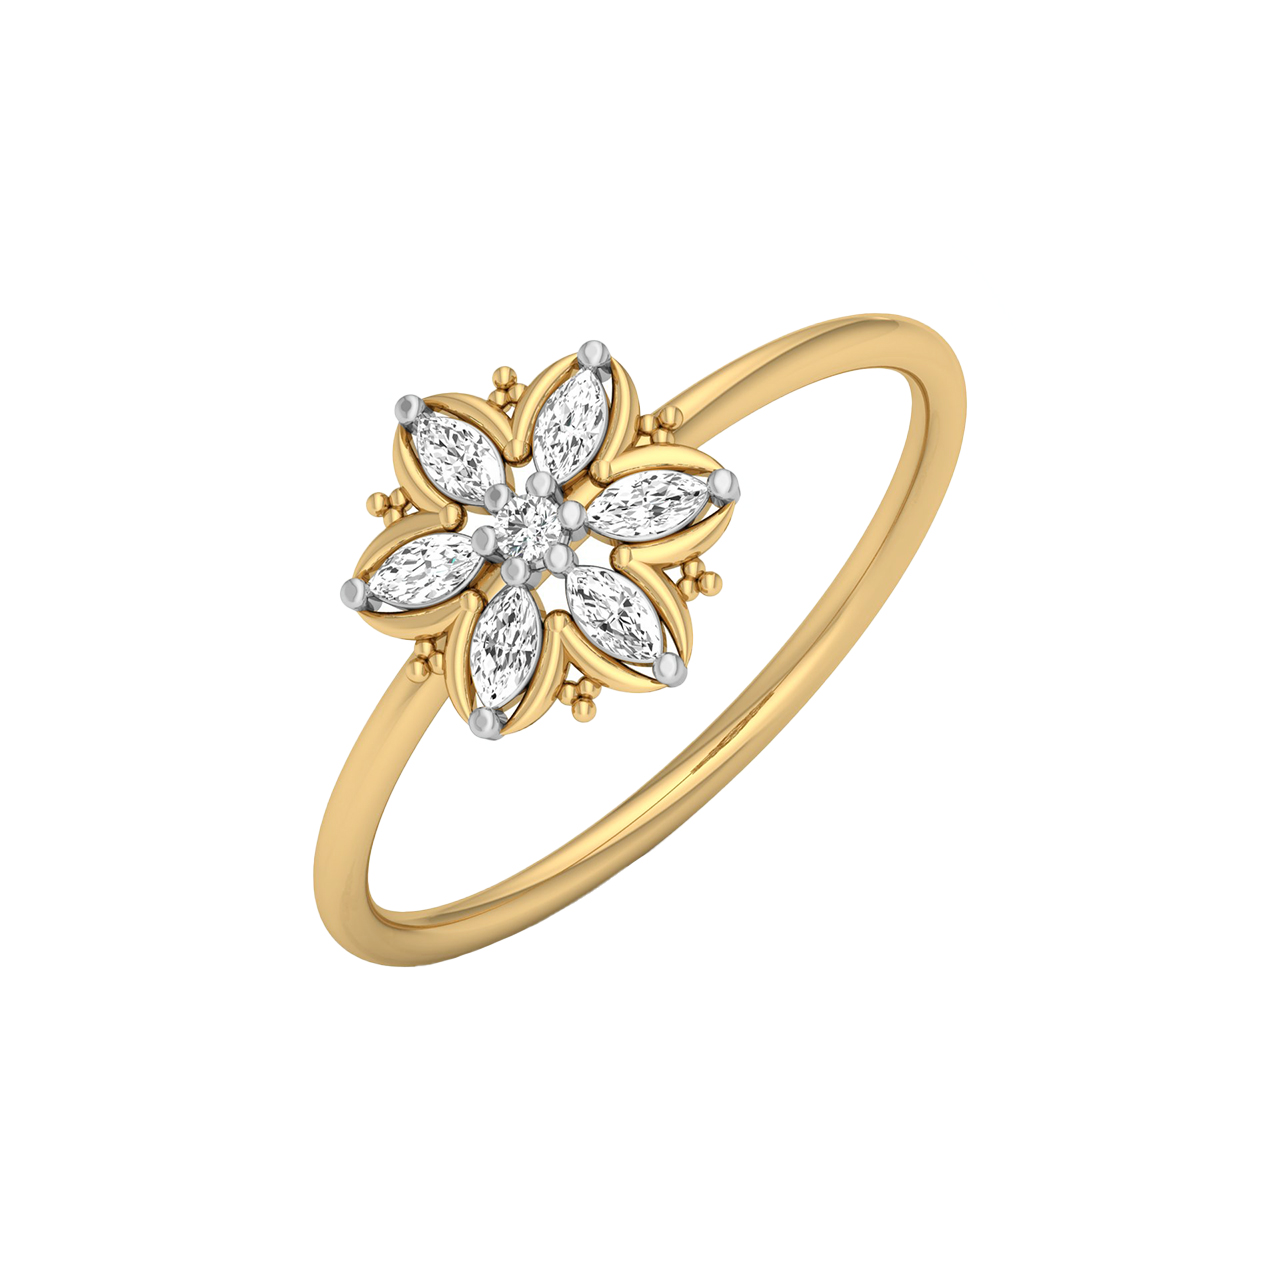 Sunflower Ring - Ladies 14K Yellow Gold Floral Ring